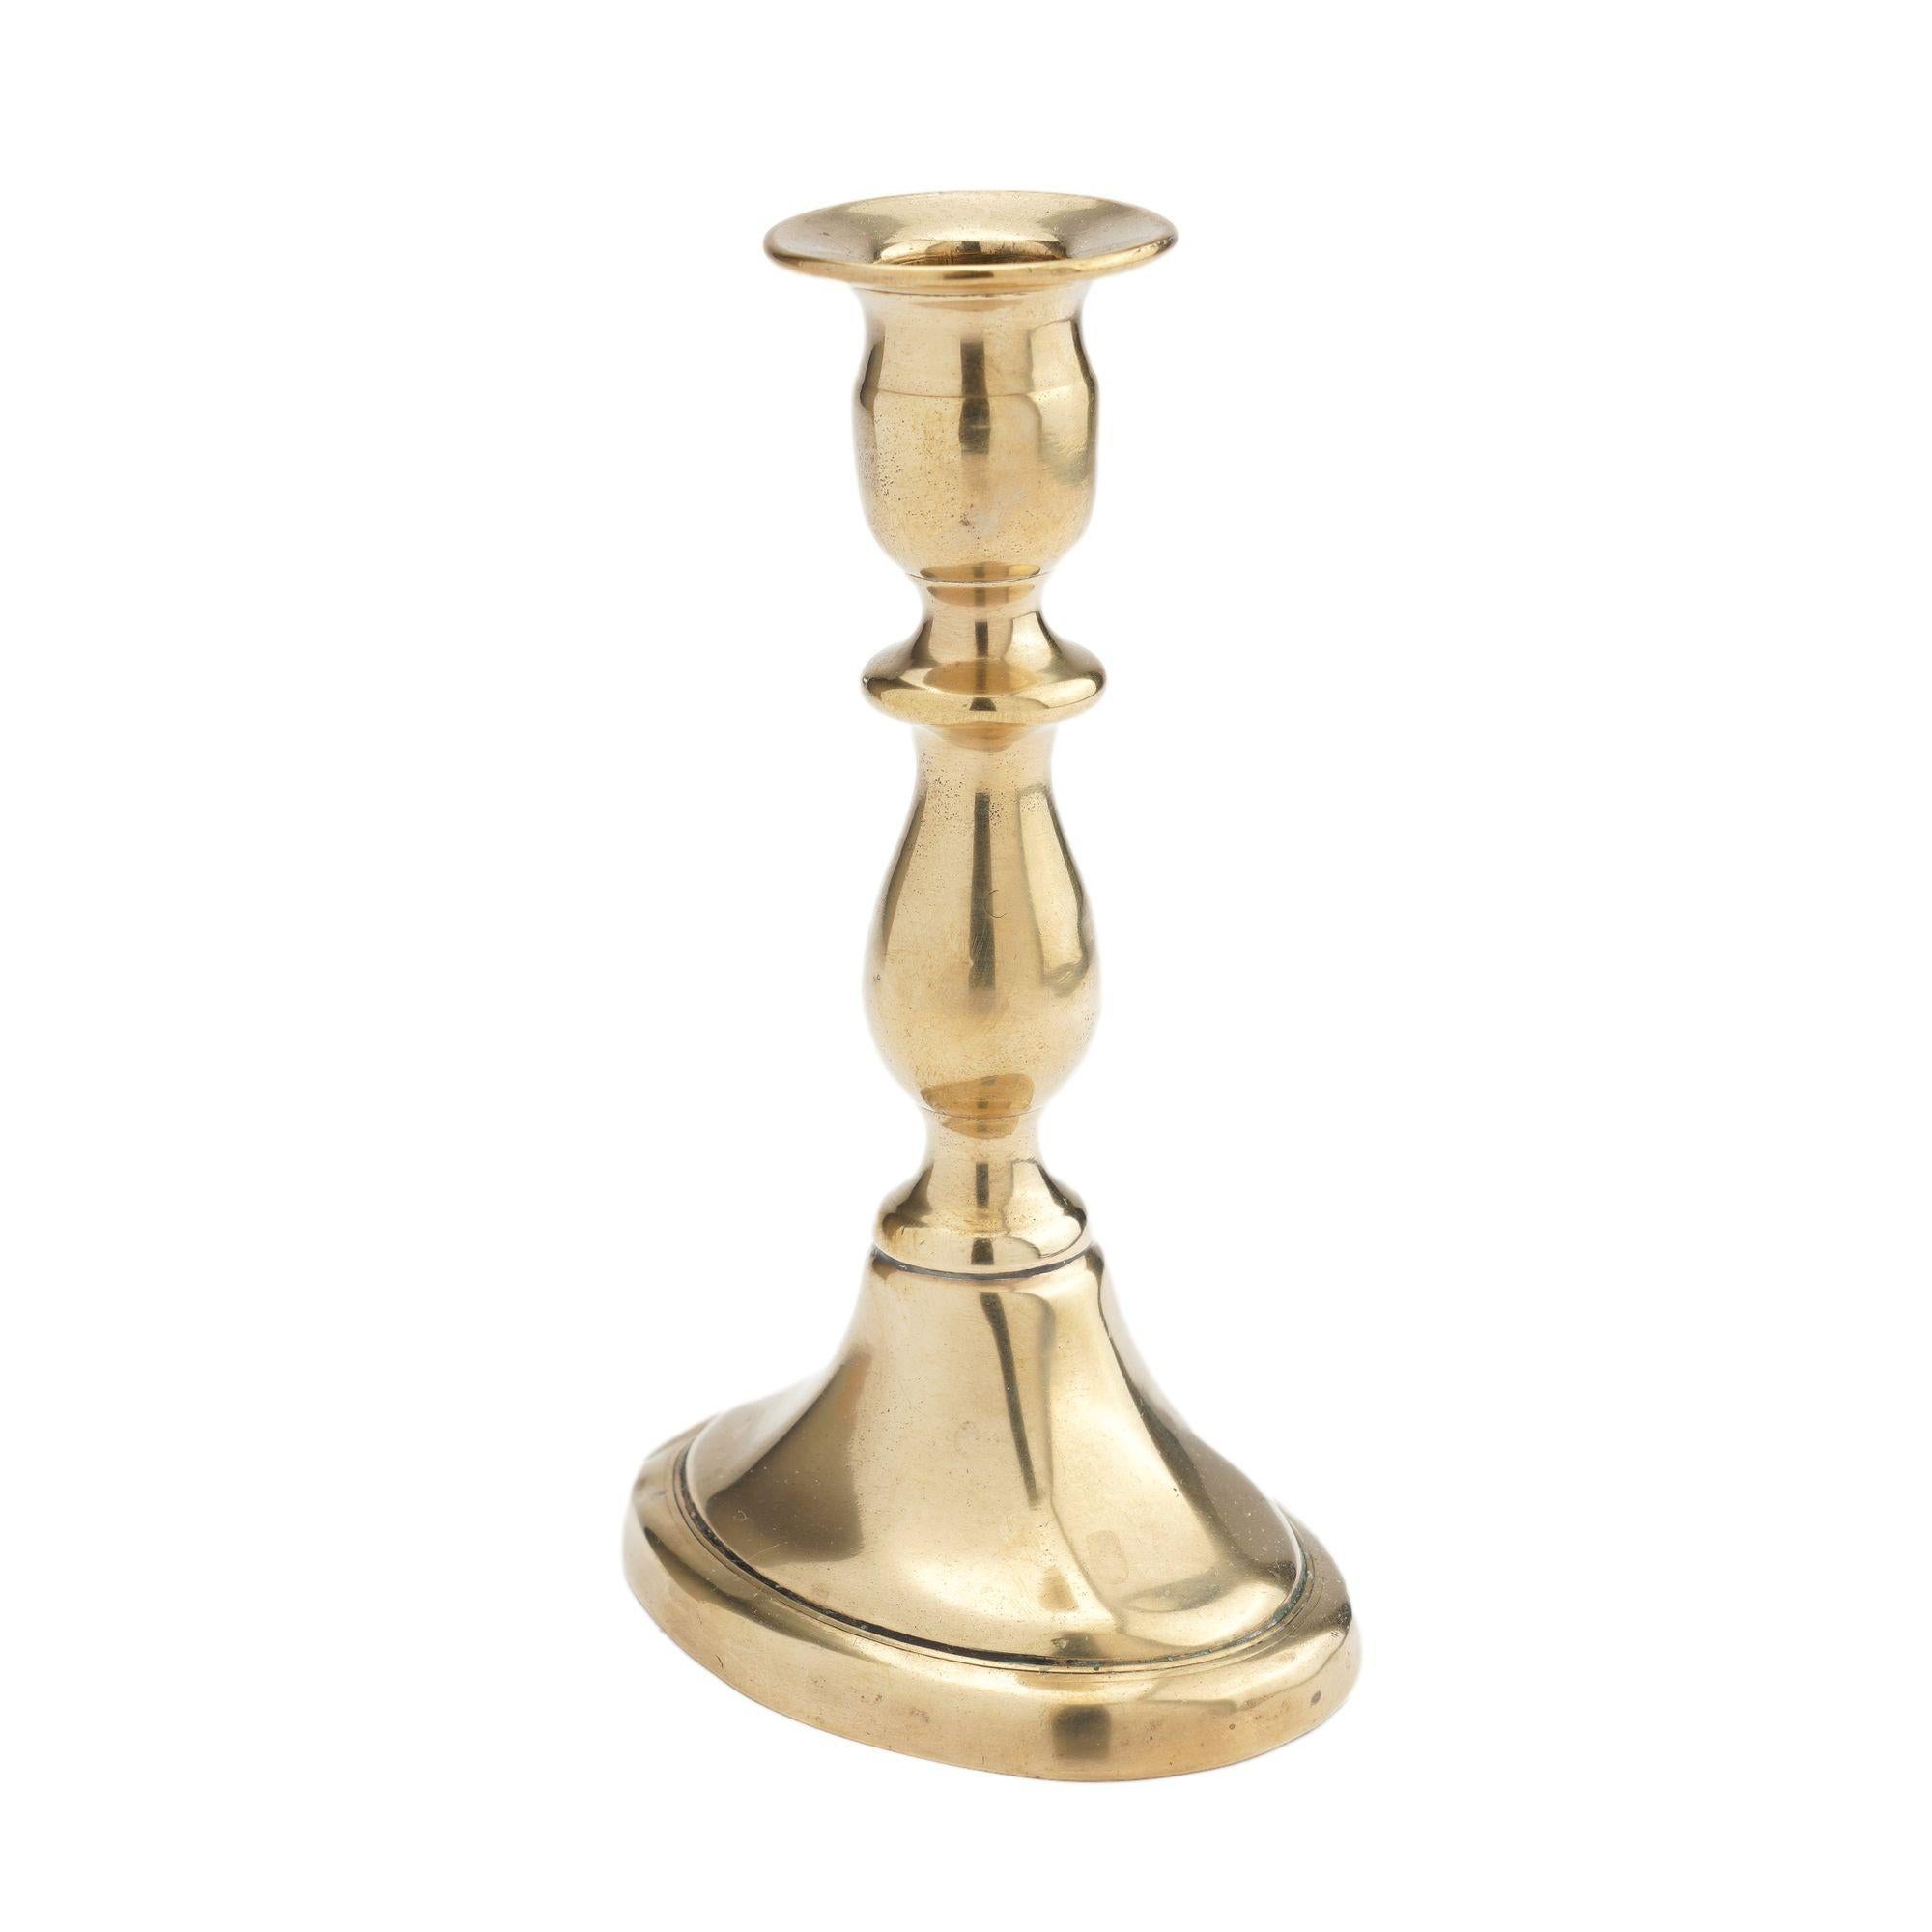 English cast brass oval base candlestick by William A. Harrison, 1791-1818 For Sale 1